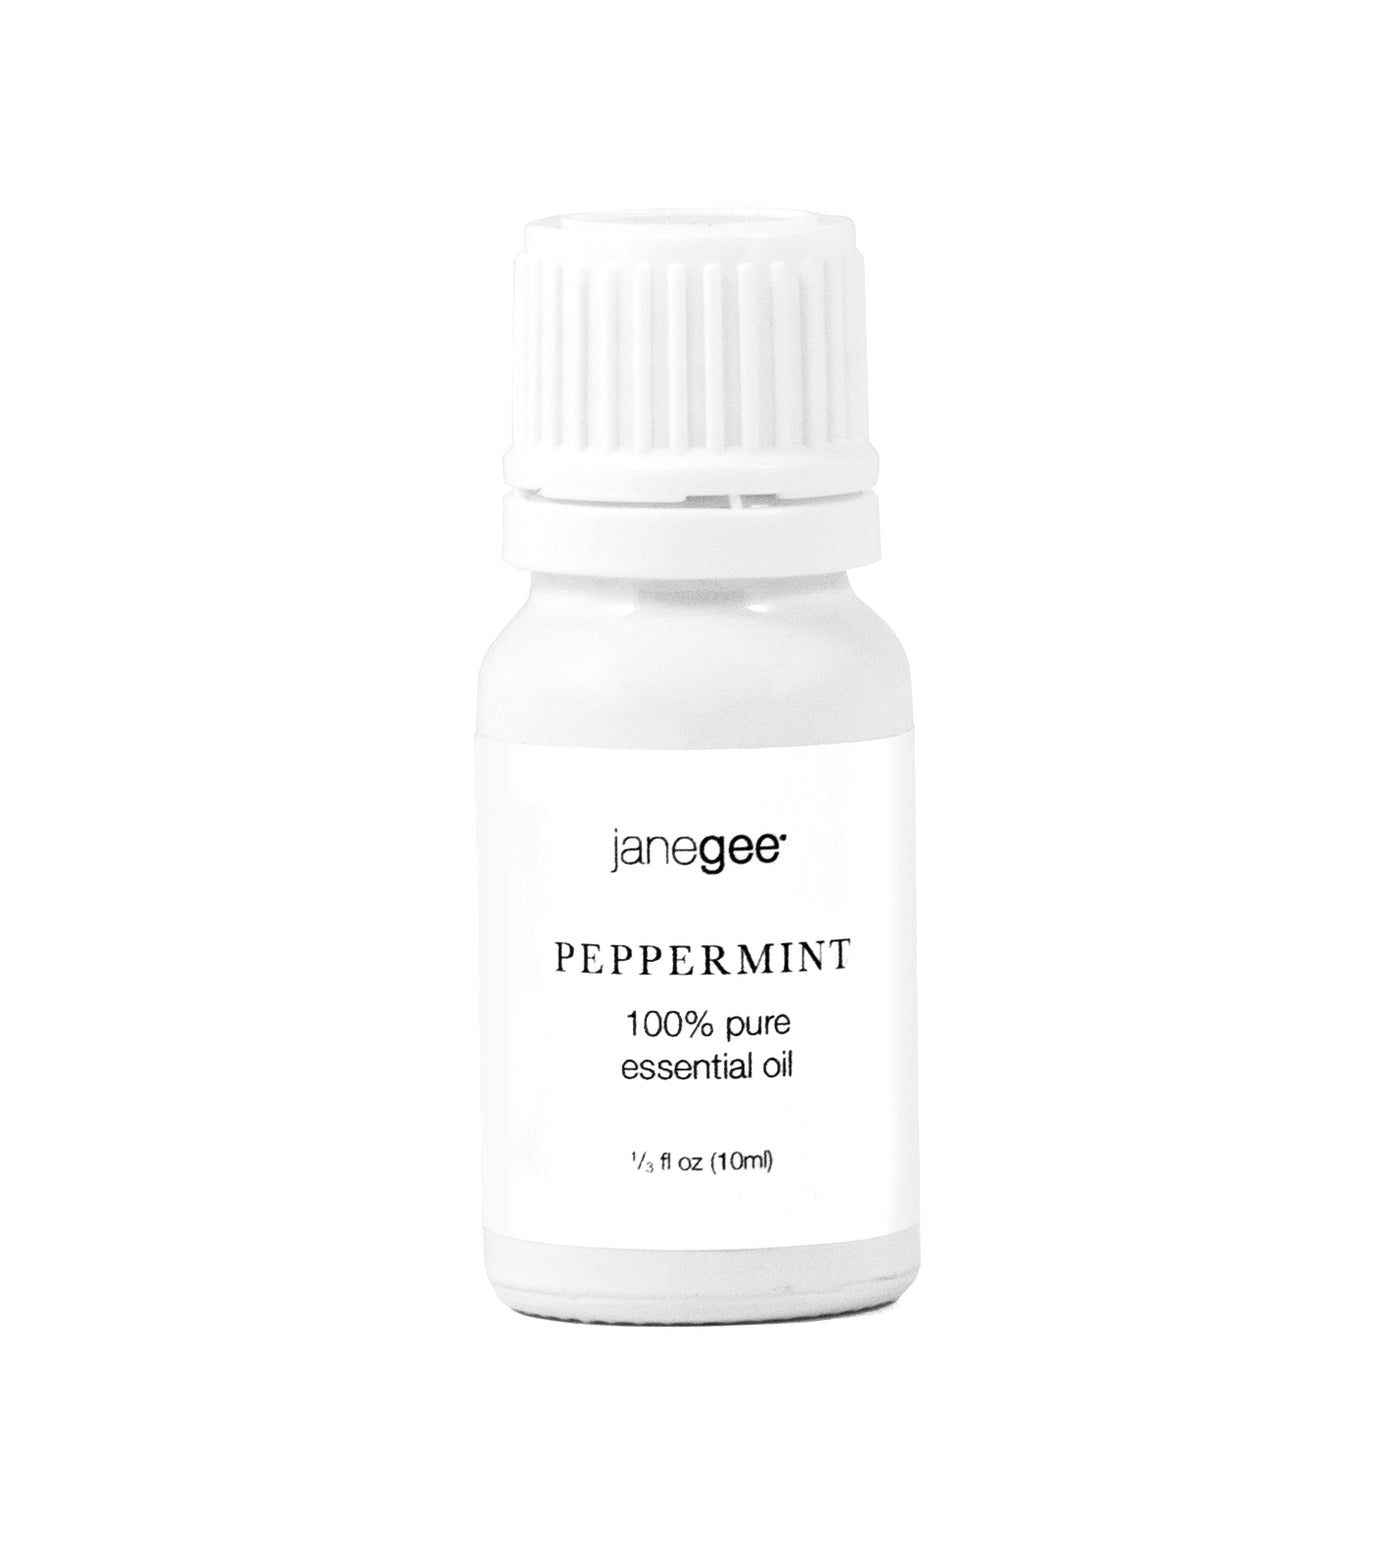 janegee Peppermint Essential Oil